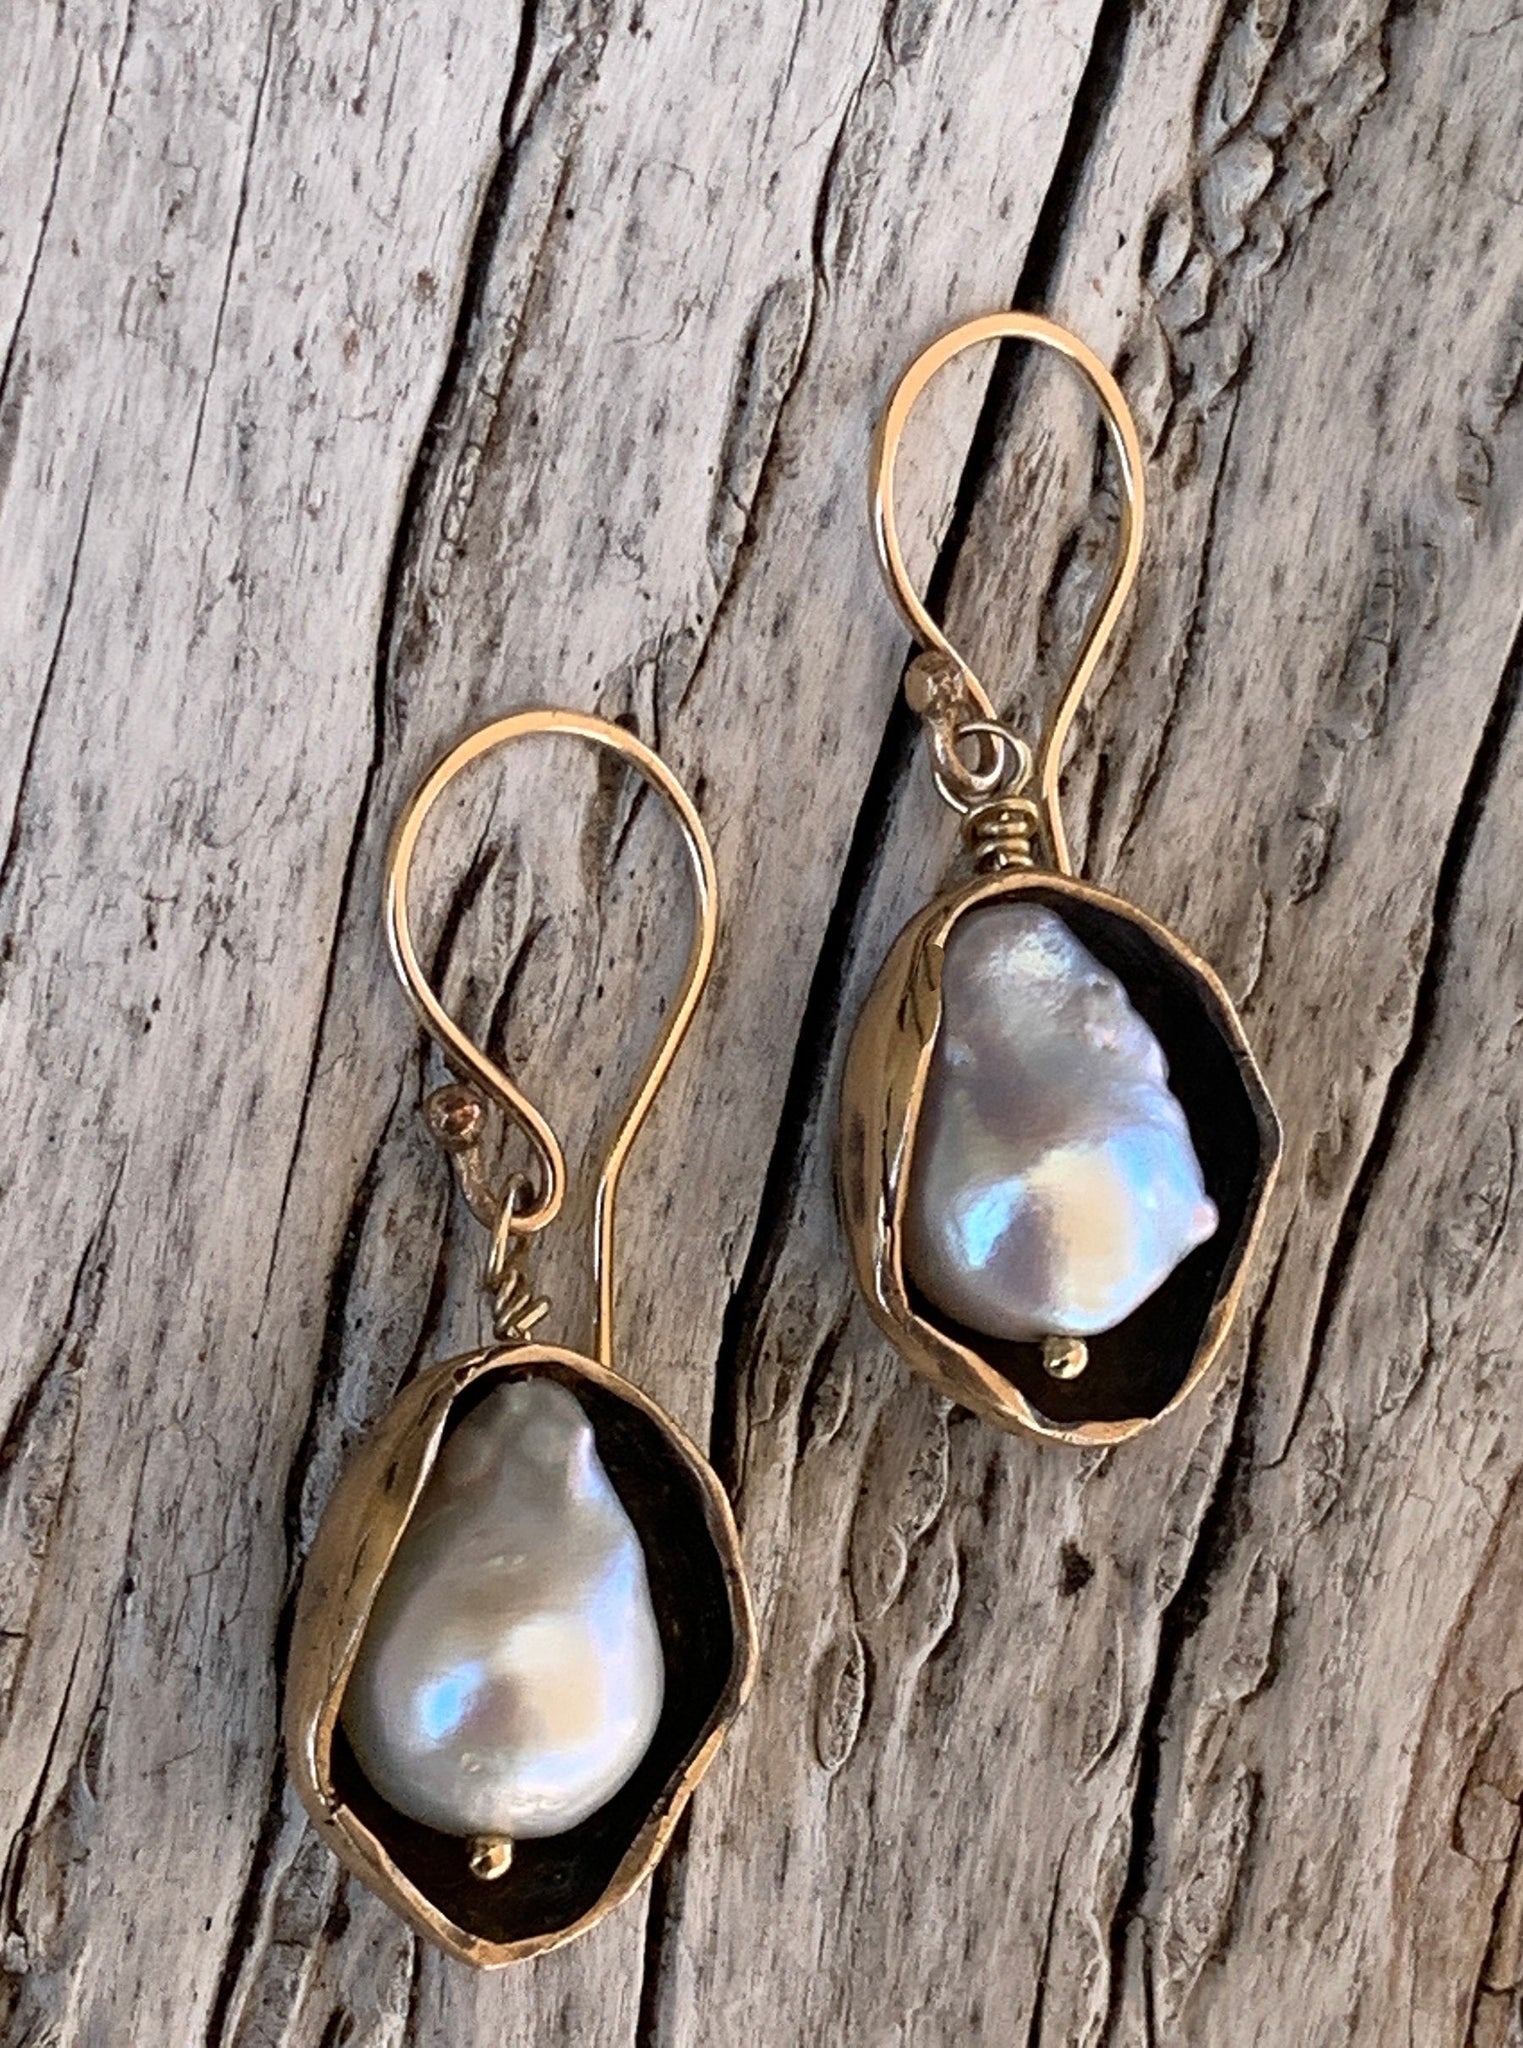 Bronze Pod Earrings with Flame Ball Pearls and 14K Gold Fill Ear Wire